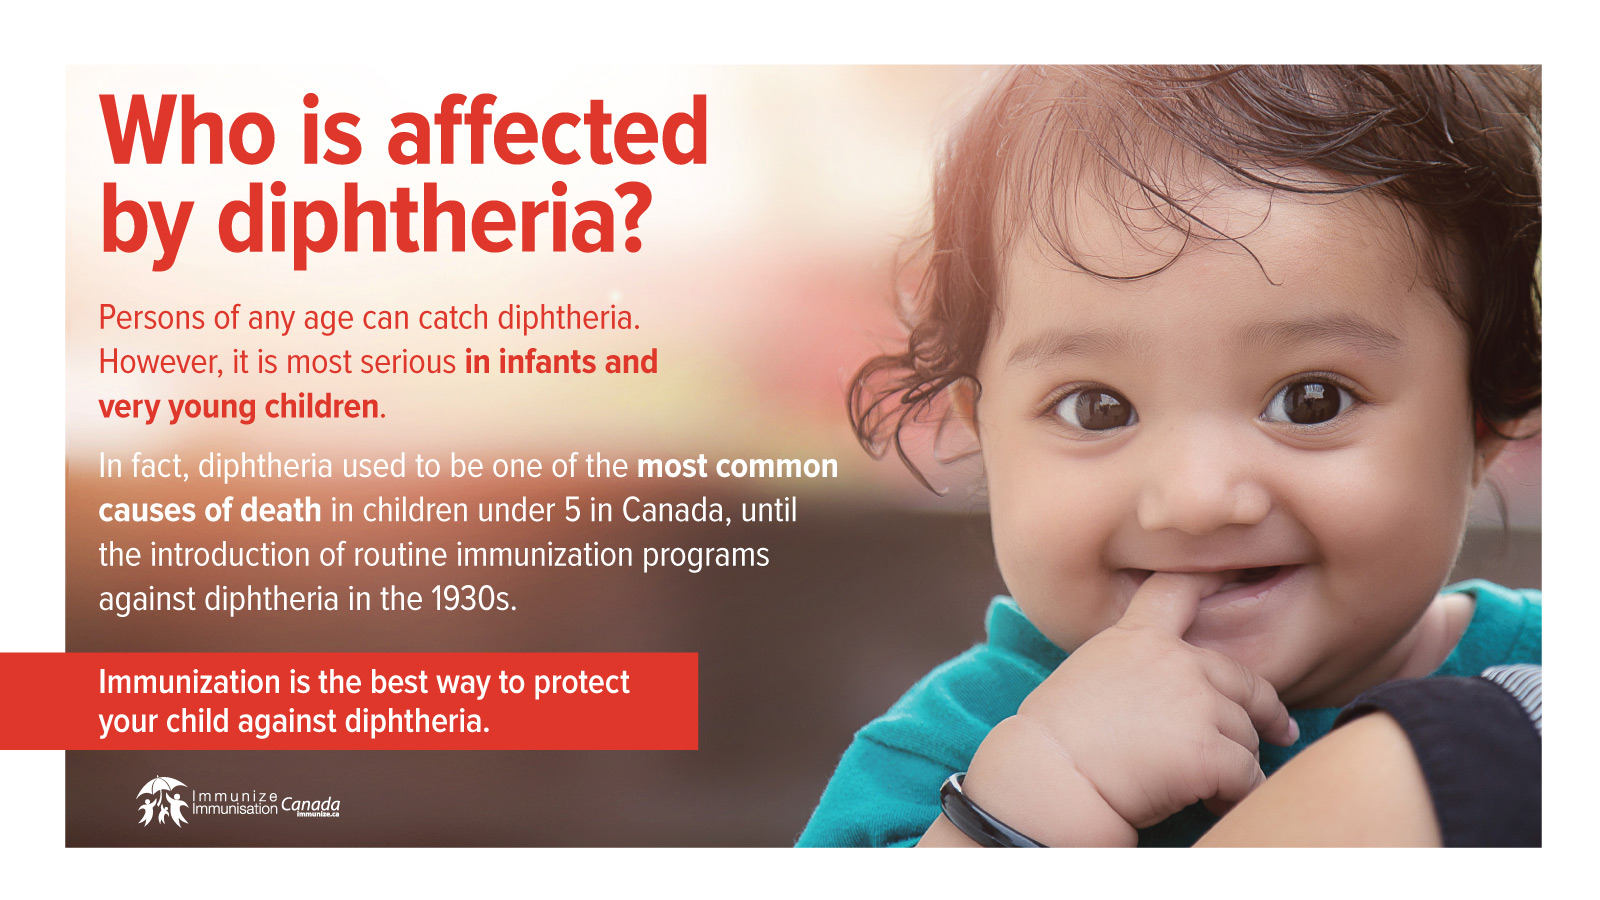 Who is affected by diphtheria? - image for Twitter and Facebook